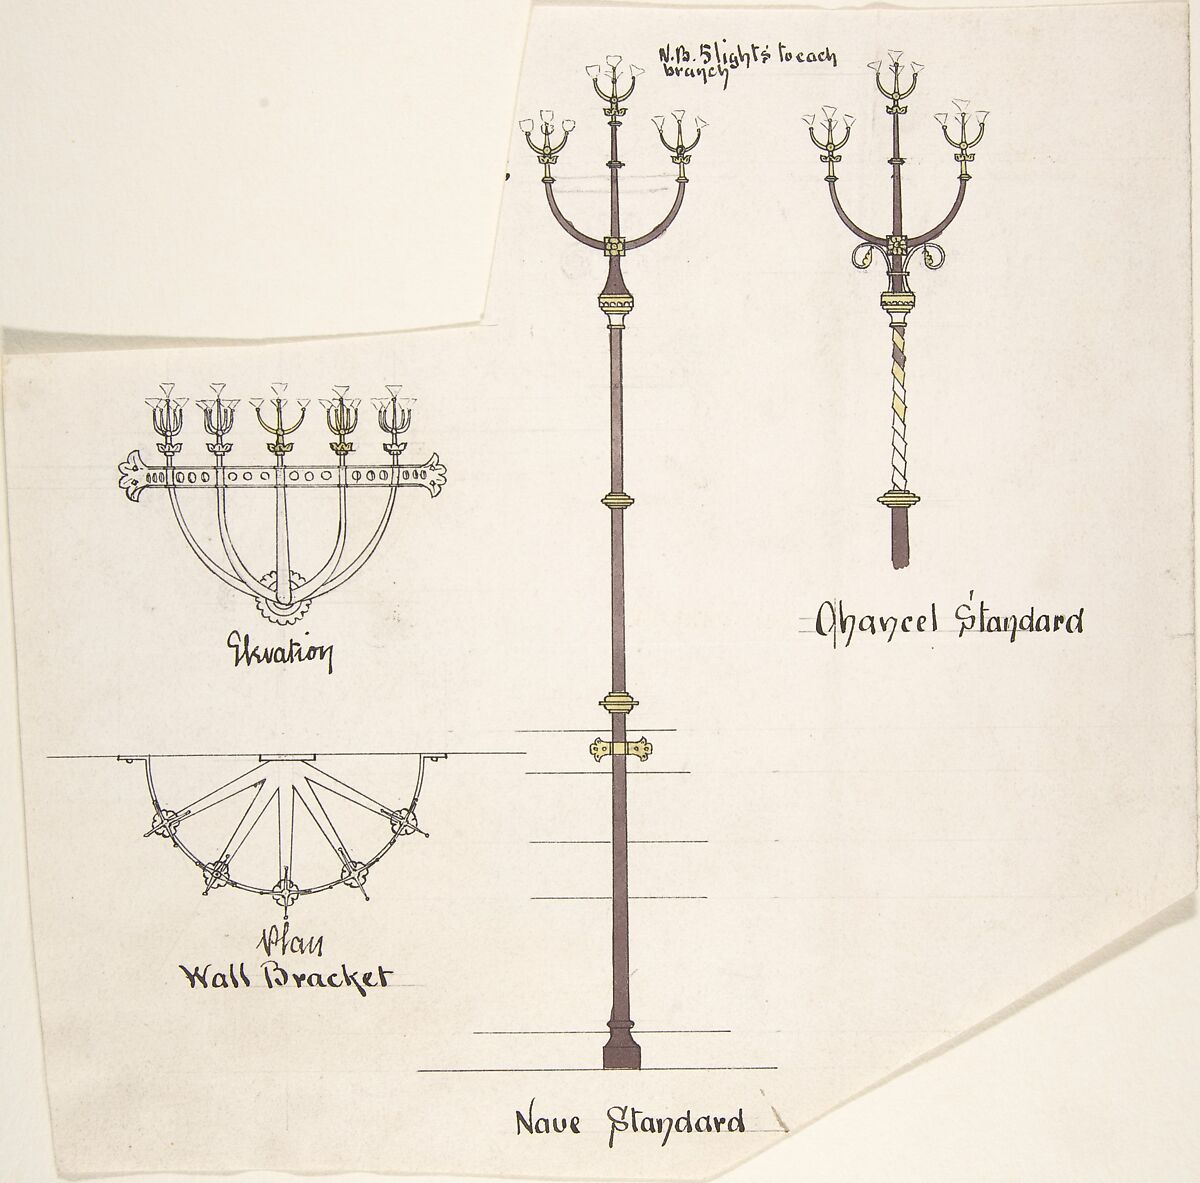 Designs for Church Lights: Wall Bracket, Nave Standard, Chancel Standard, Richardson Ellson &amp; Co. (British), Pen and ink, brush and wash and watercolor 